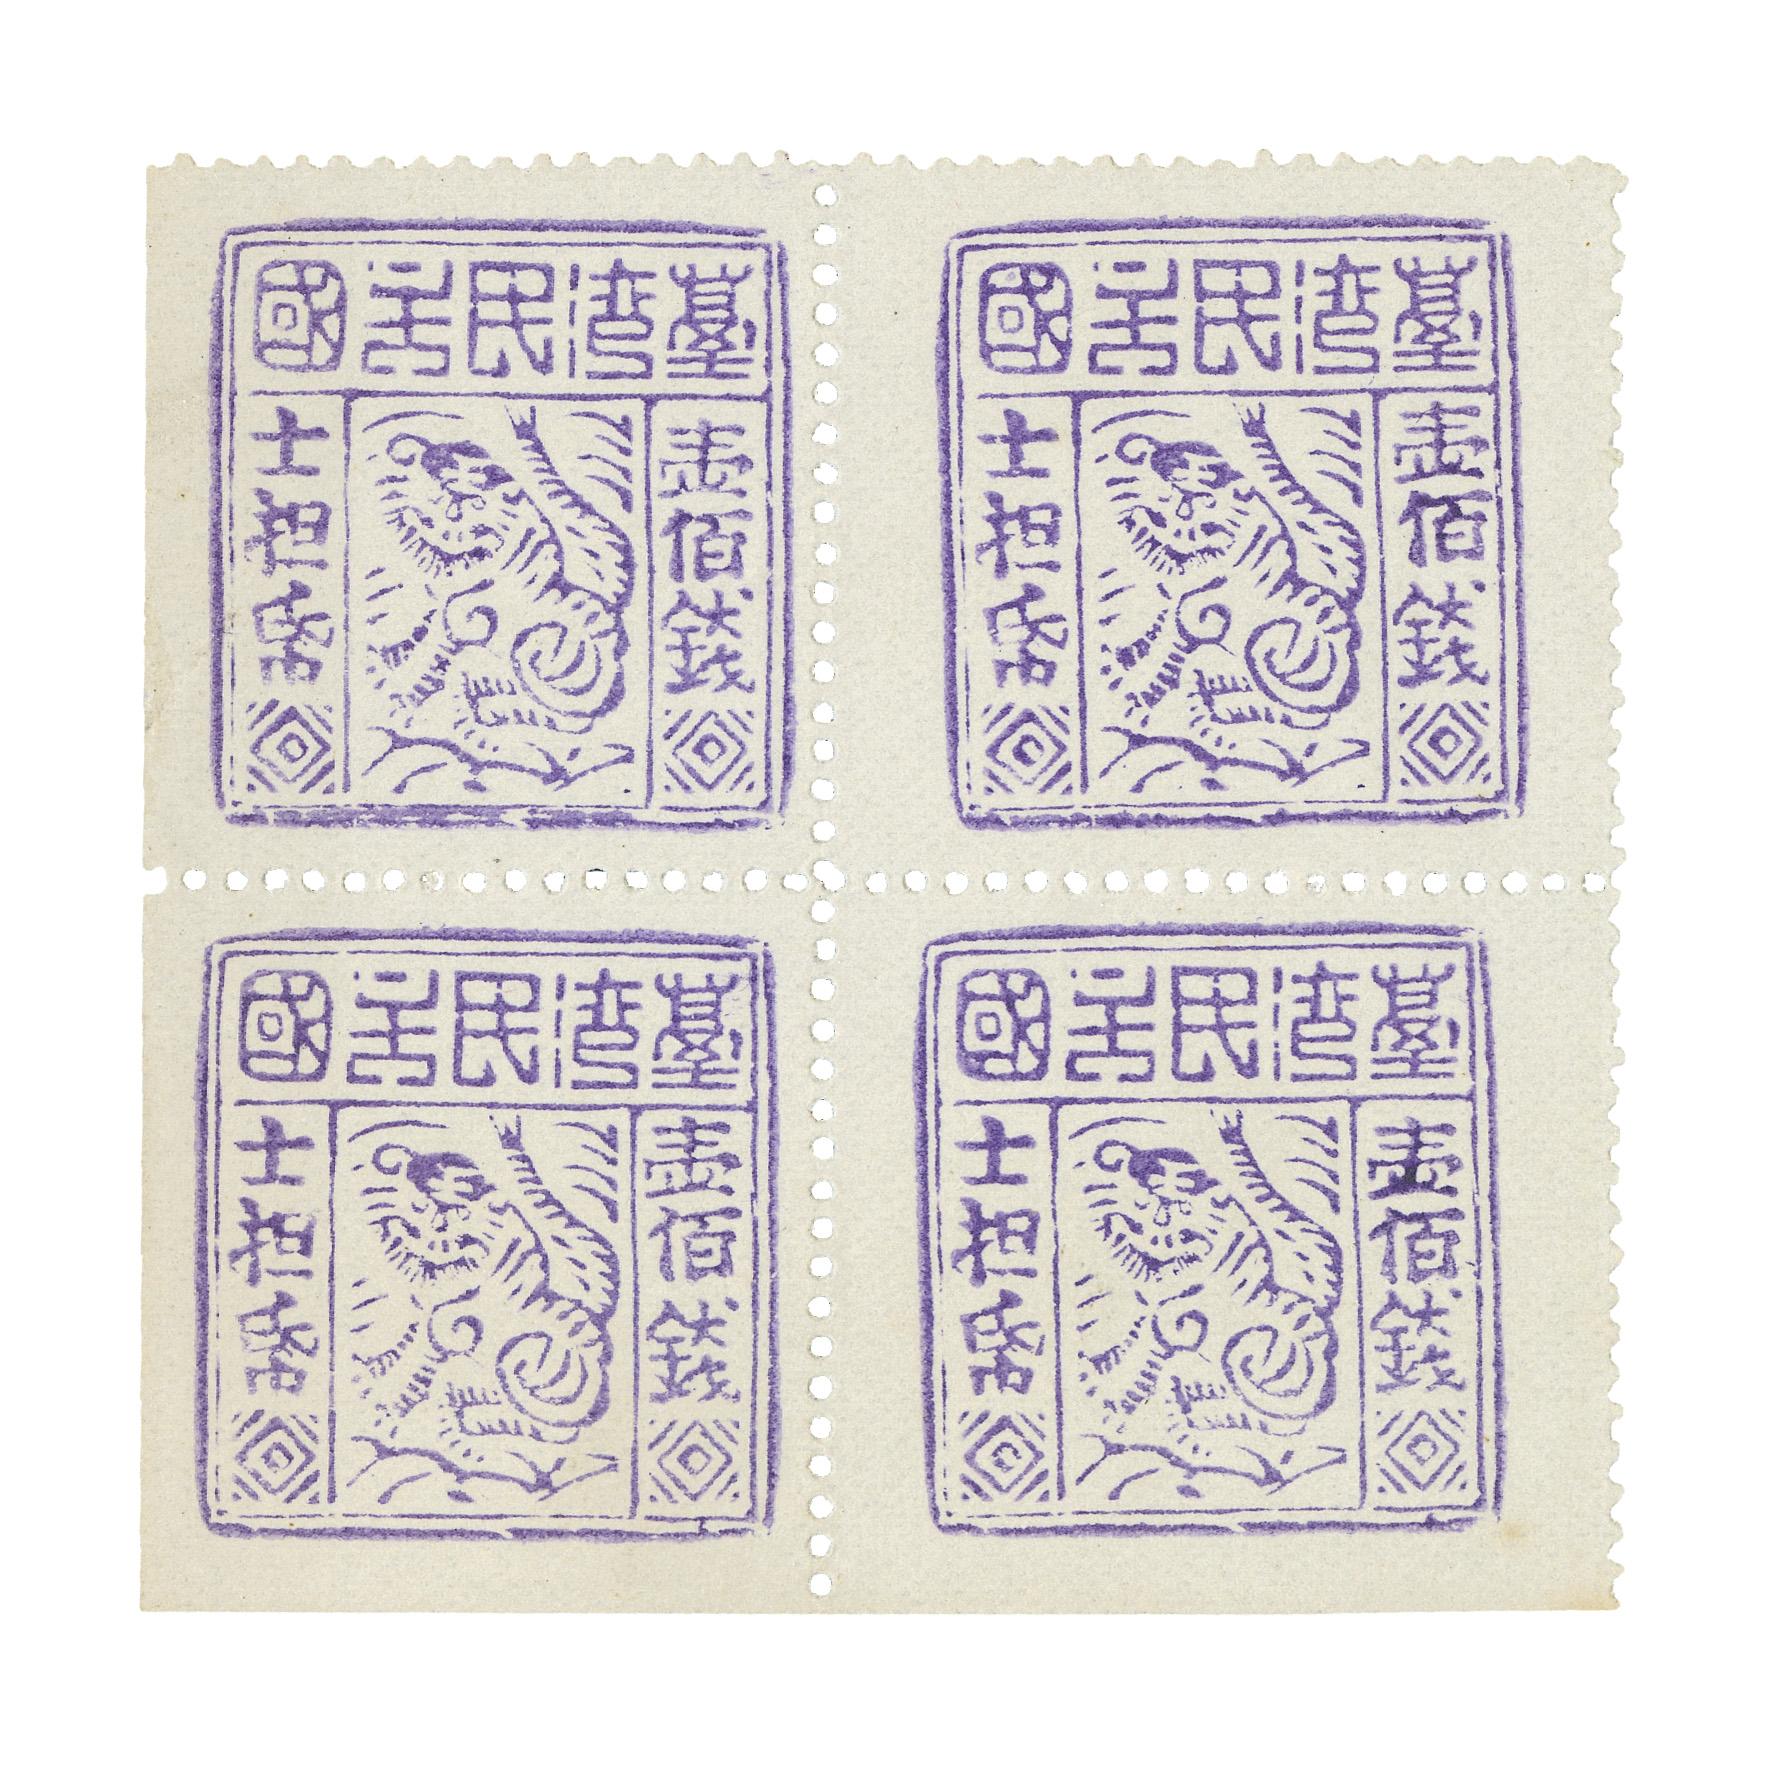 Solo-Tiger Postage Stamp